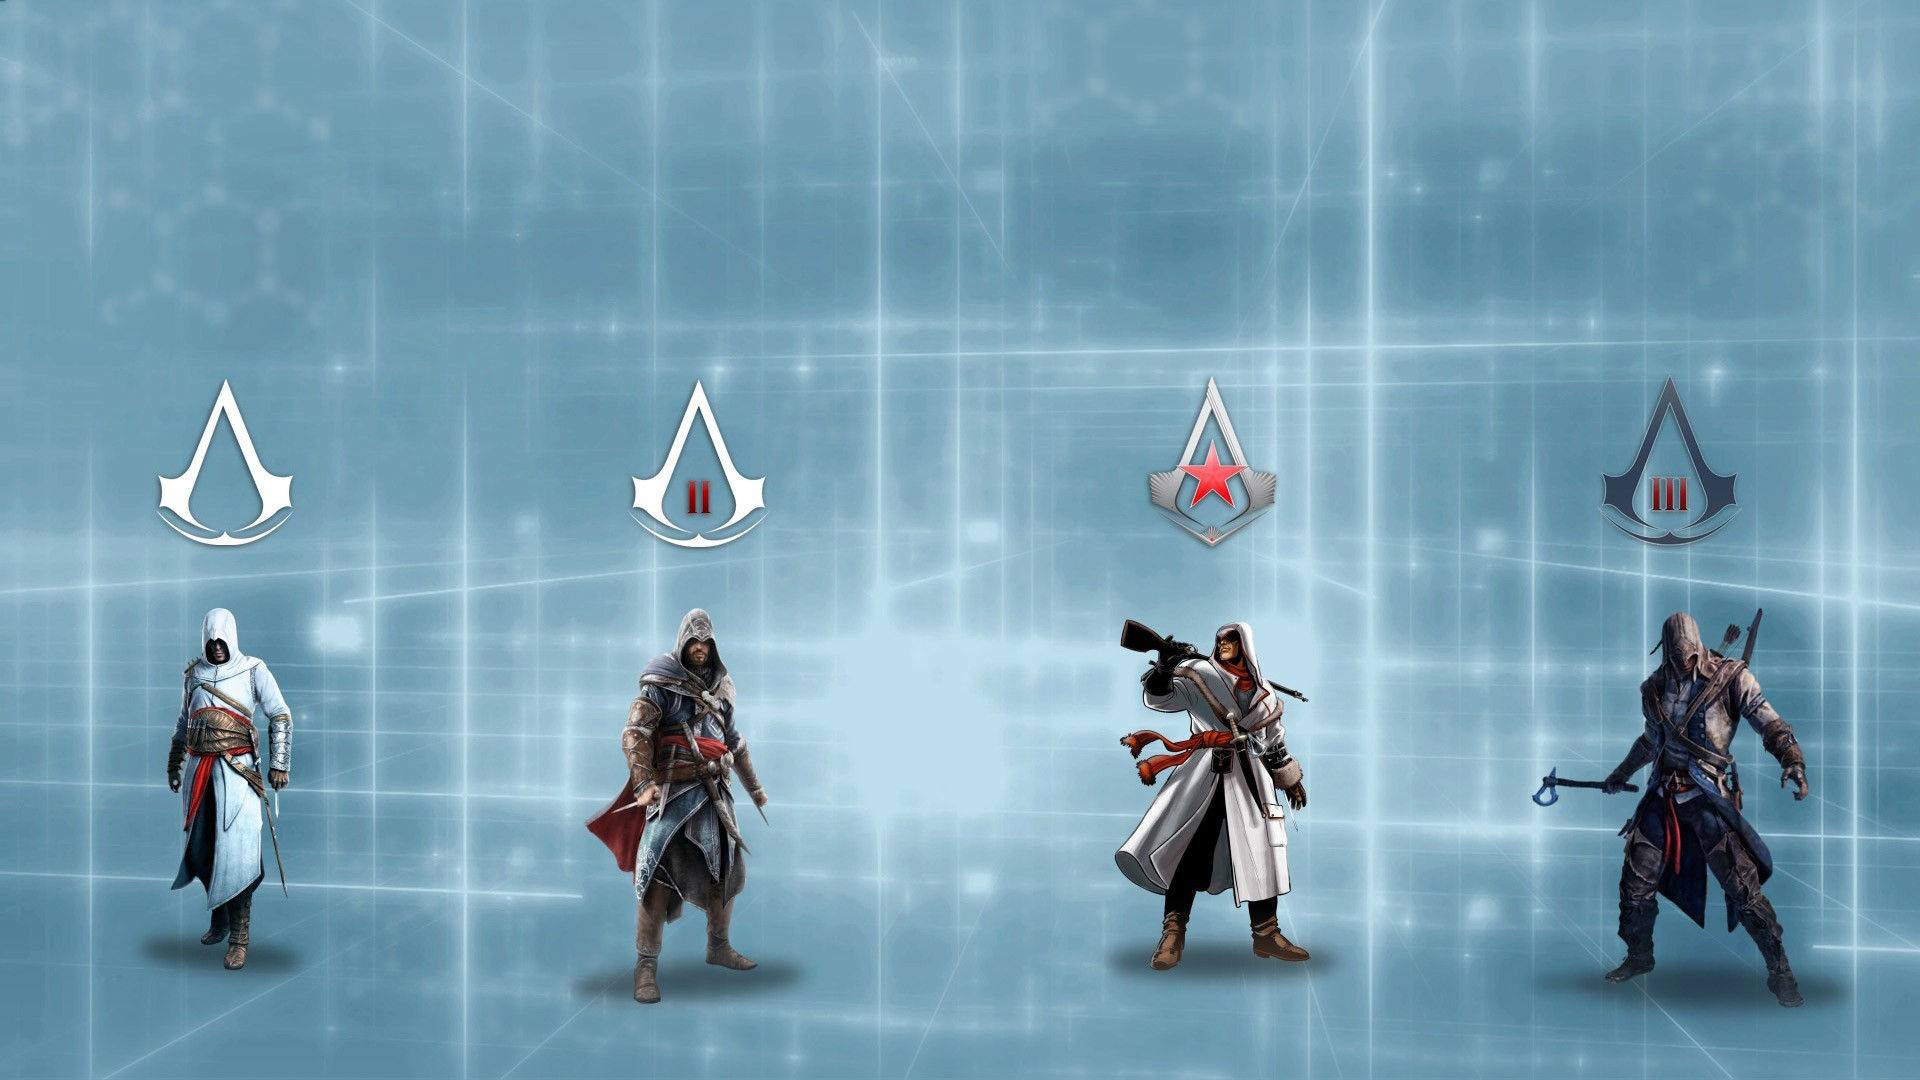 1920x1080 Free Assassin's Creed III Wallpaper in 